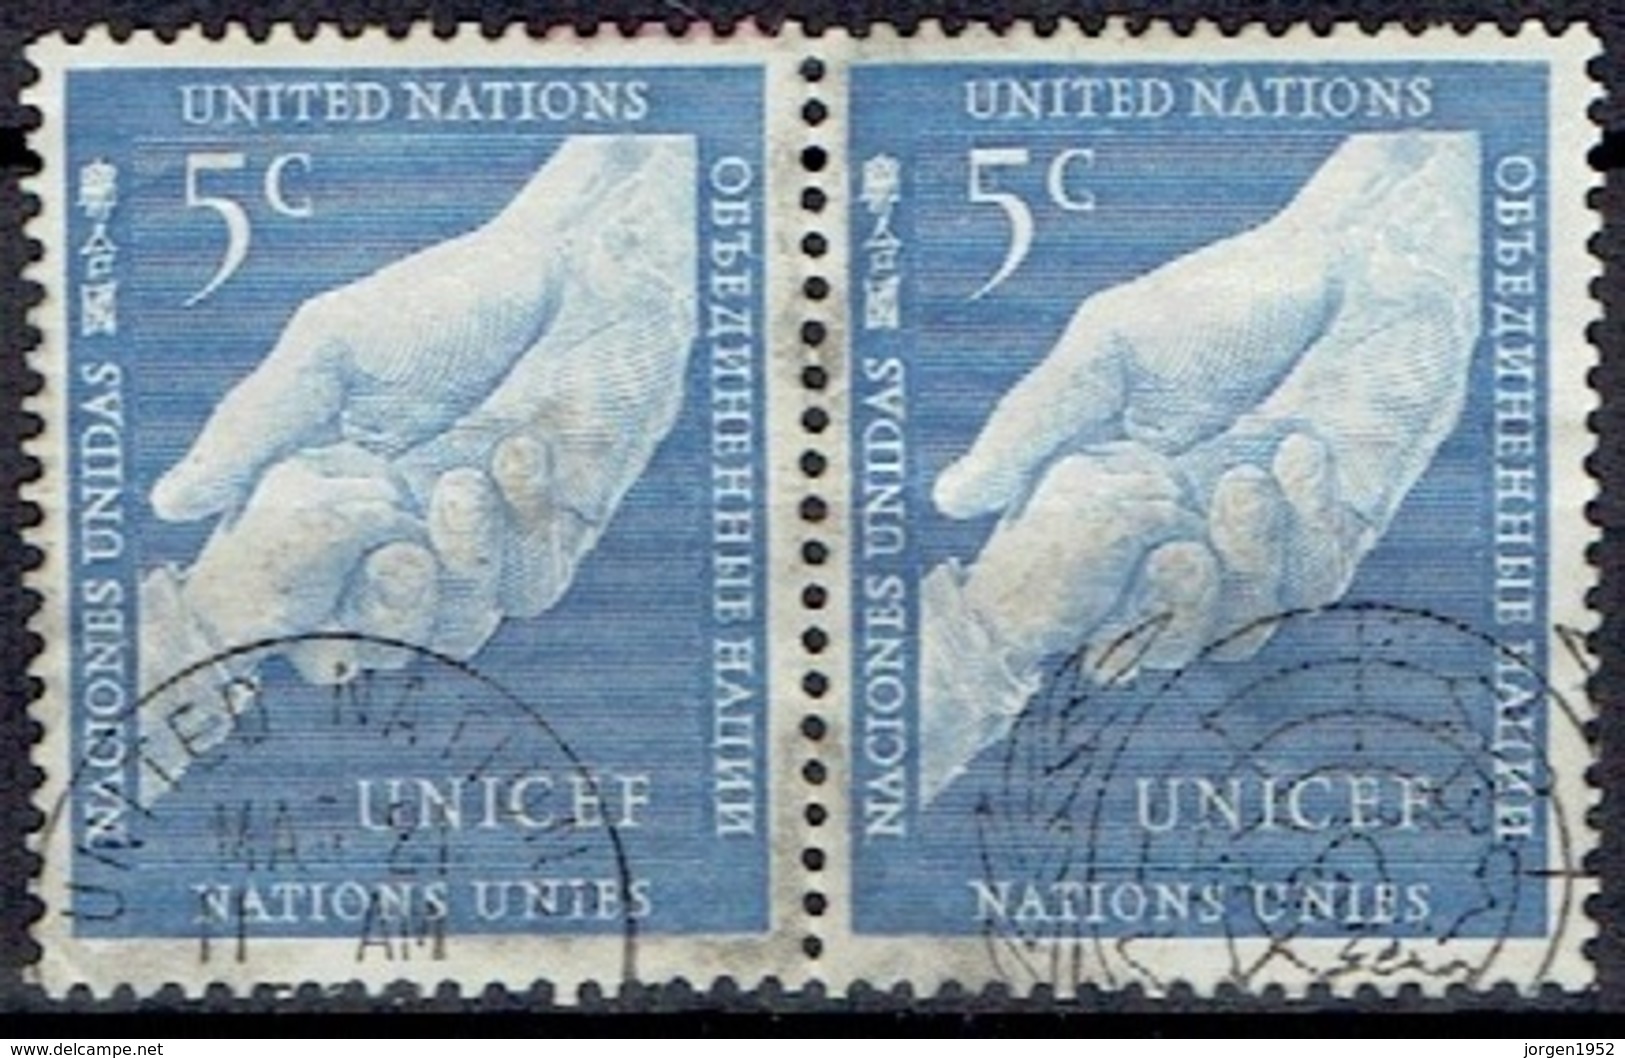 UNITED NATIONS # NEW YORK FROM 1951 STAMPWORLD 5 - Usados